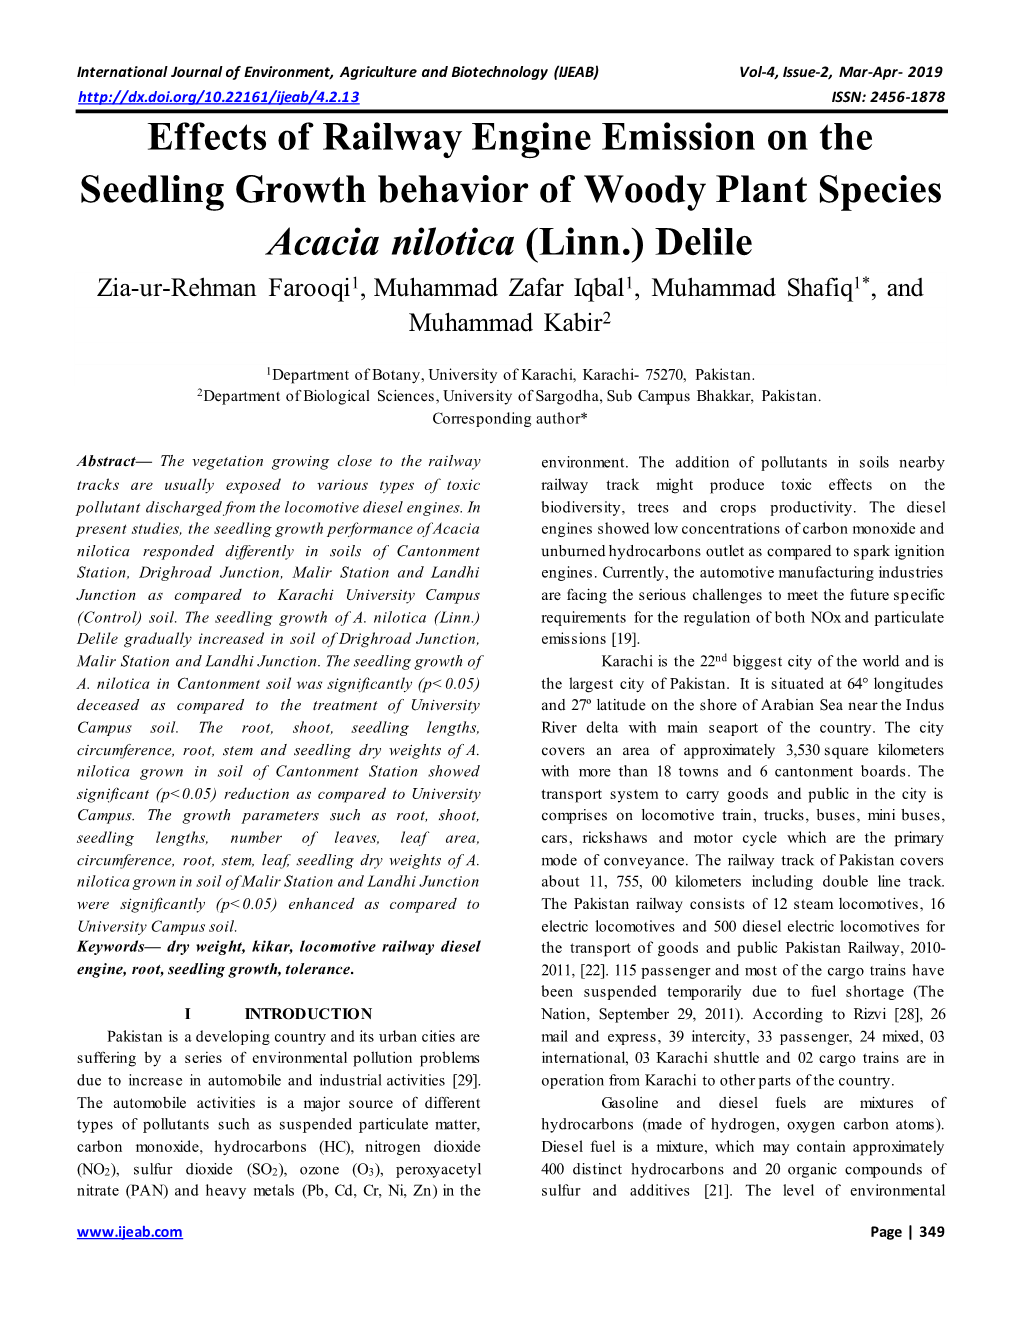 Effects of Railway Engine Emission on the Seedling Growth Behavior Of